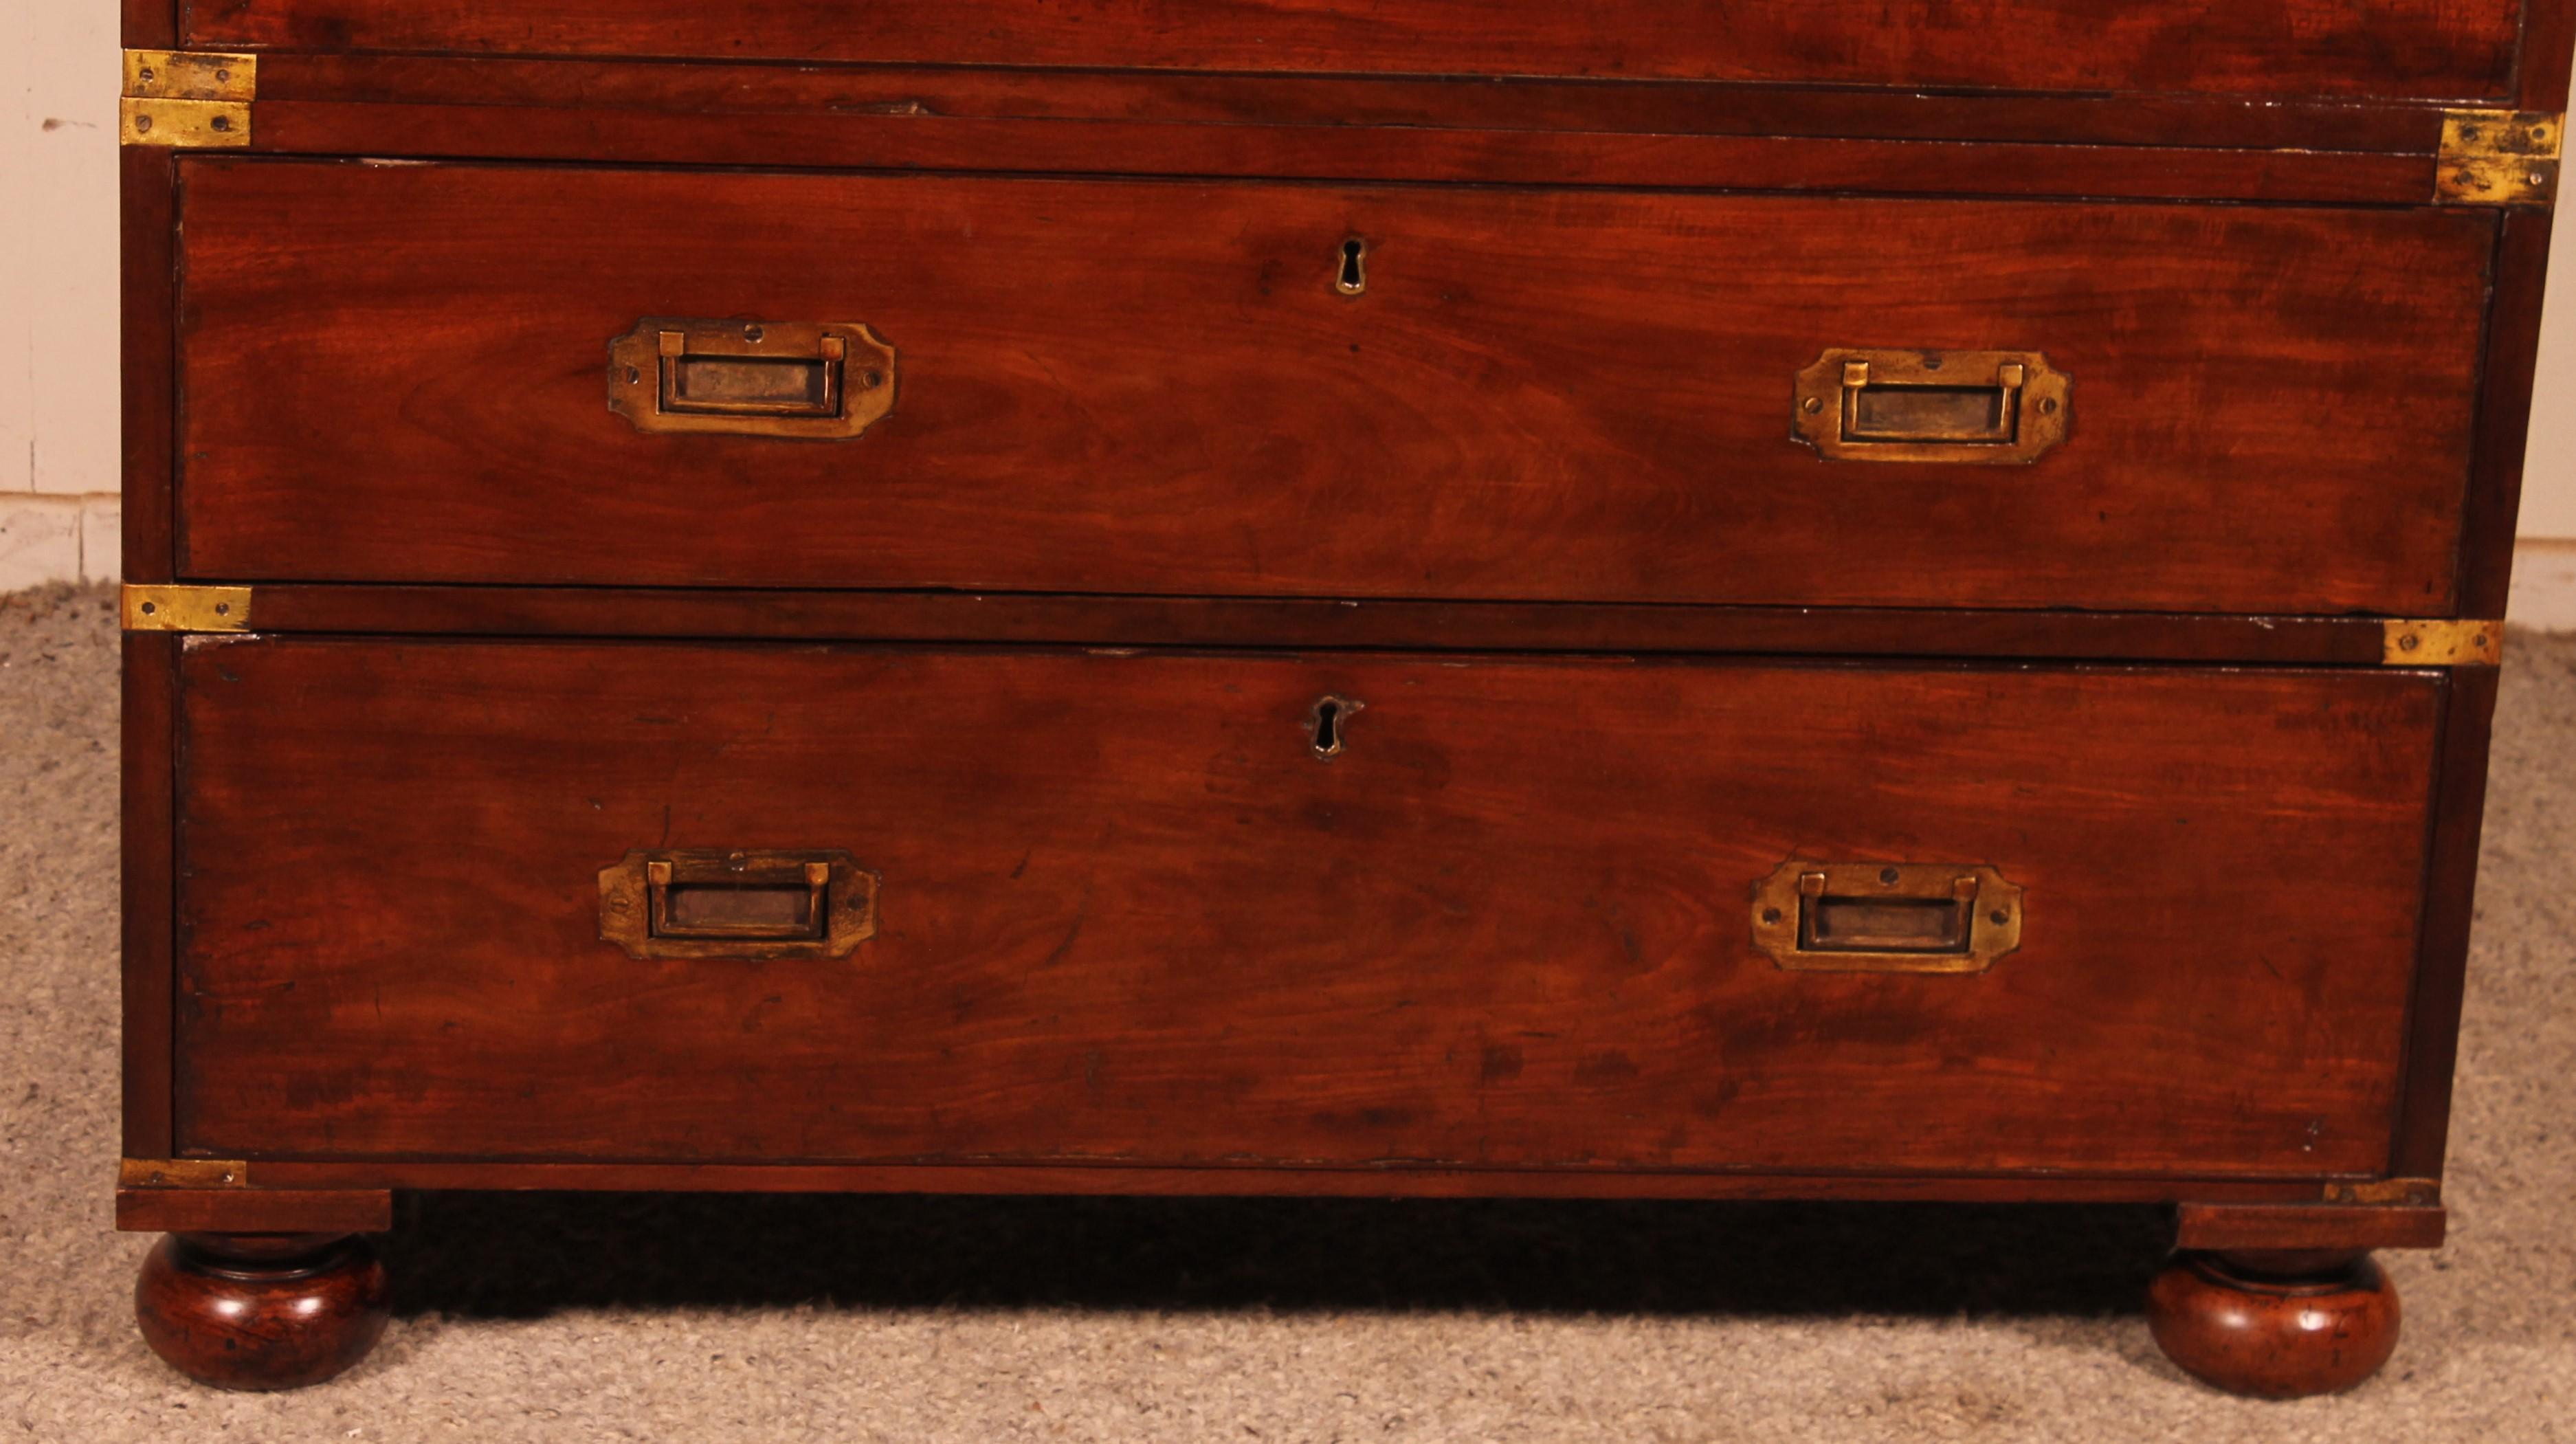 Superb 19th century camapign or marine chest of drawers from an officer in mahogany

Chest of drawers from the English navy with its typical brasses of this style of furniture and handles which have a lot of charm

commode which by its shape and